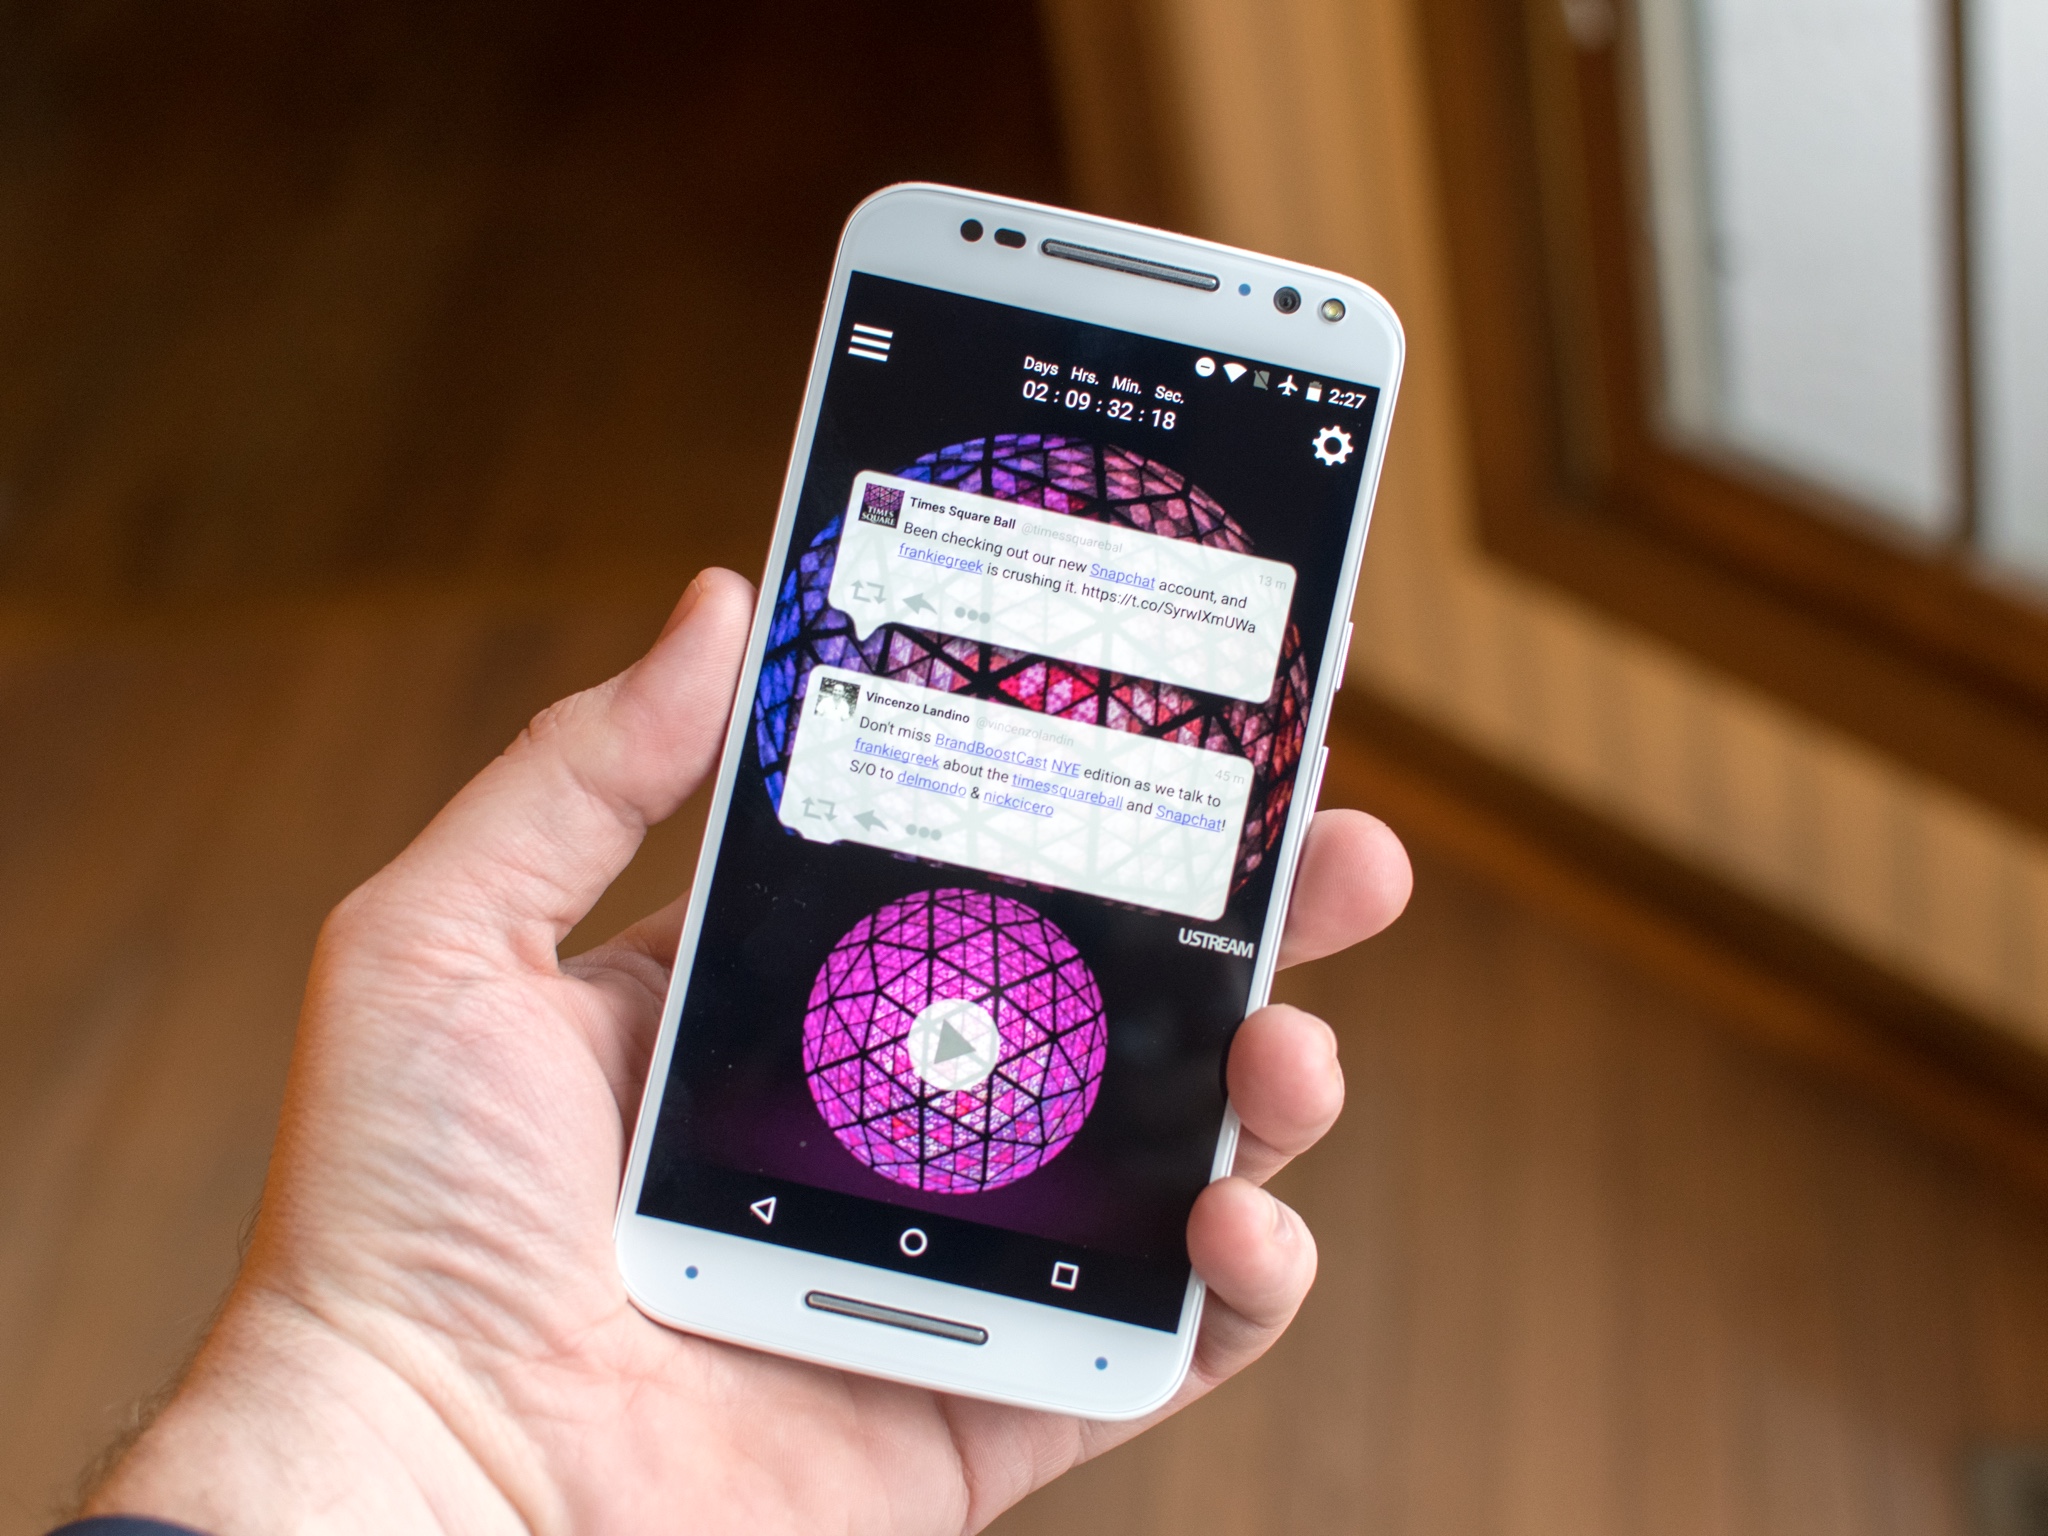 Ring in the New Year with the Times Square Official Ball app